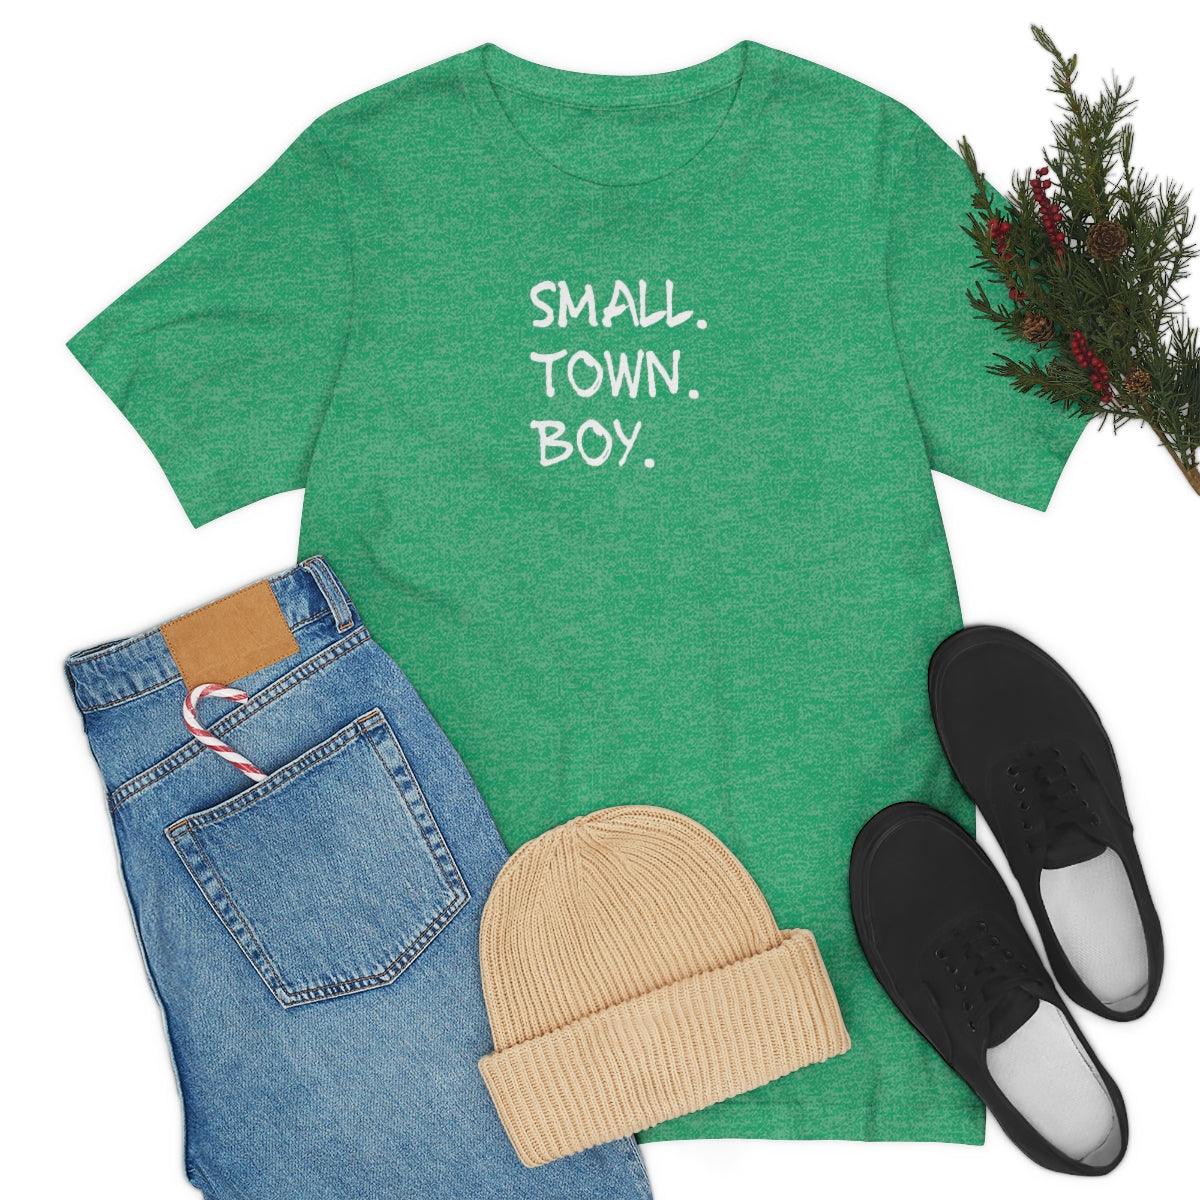 Small Town Boy - Wicked Naughty Apparel